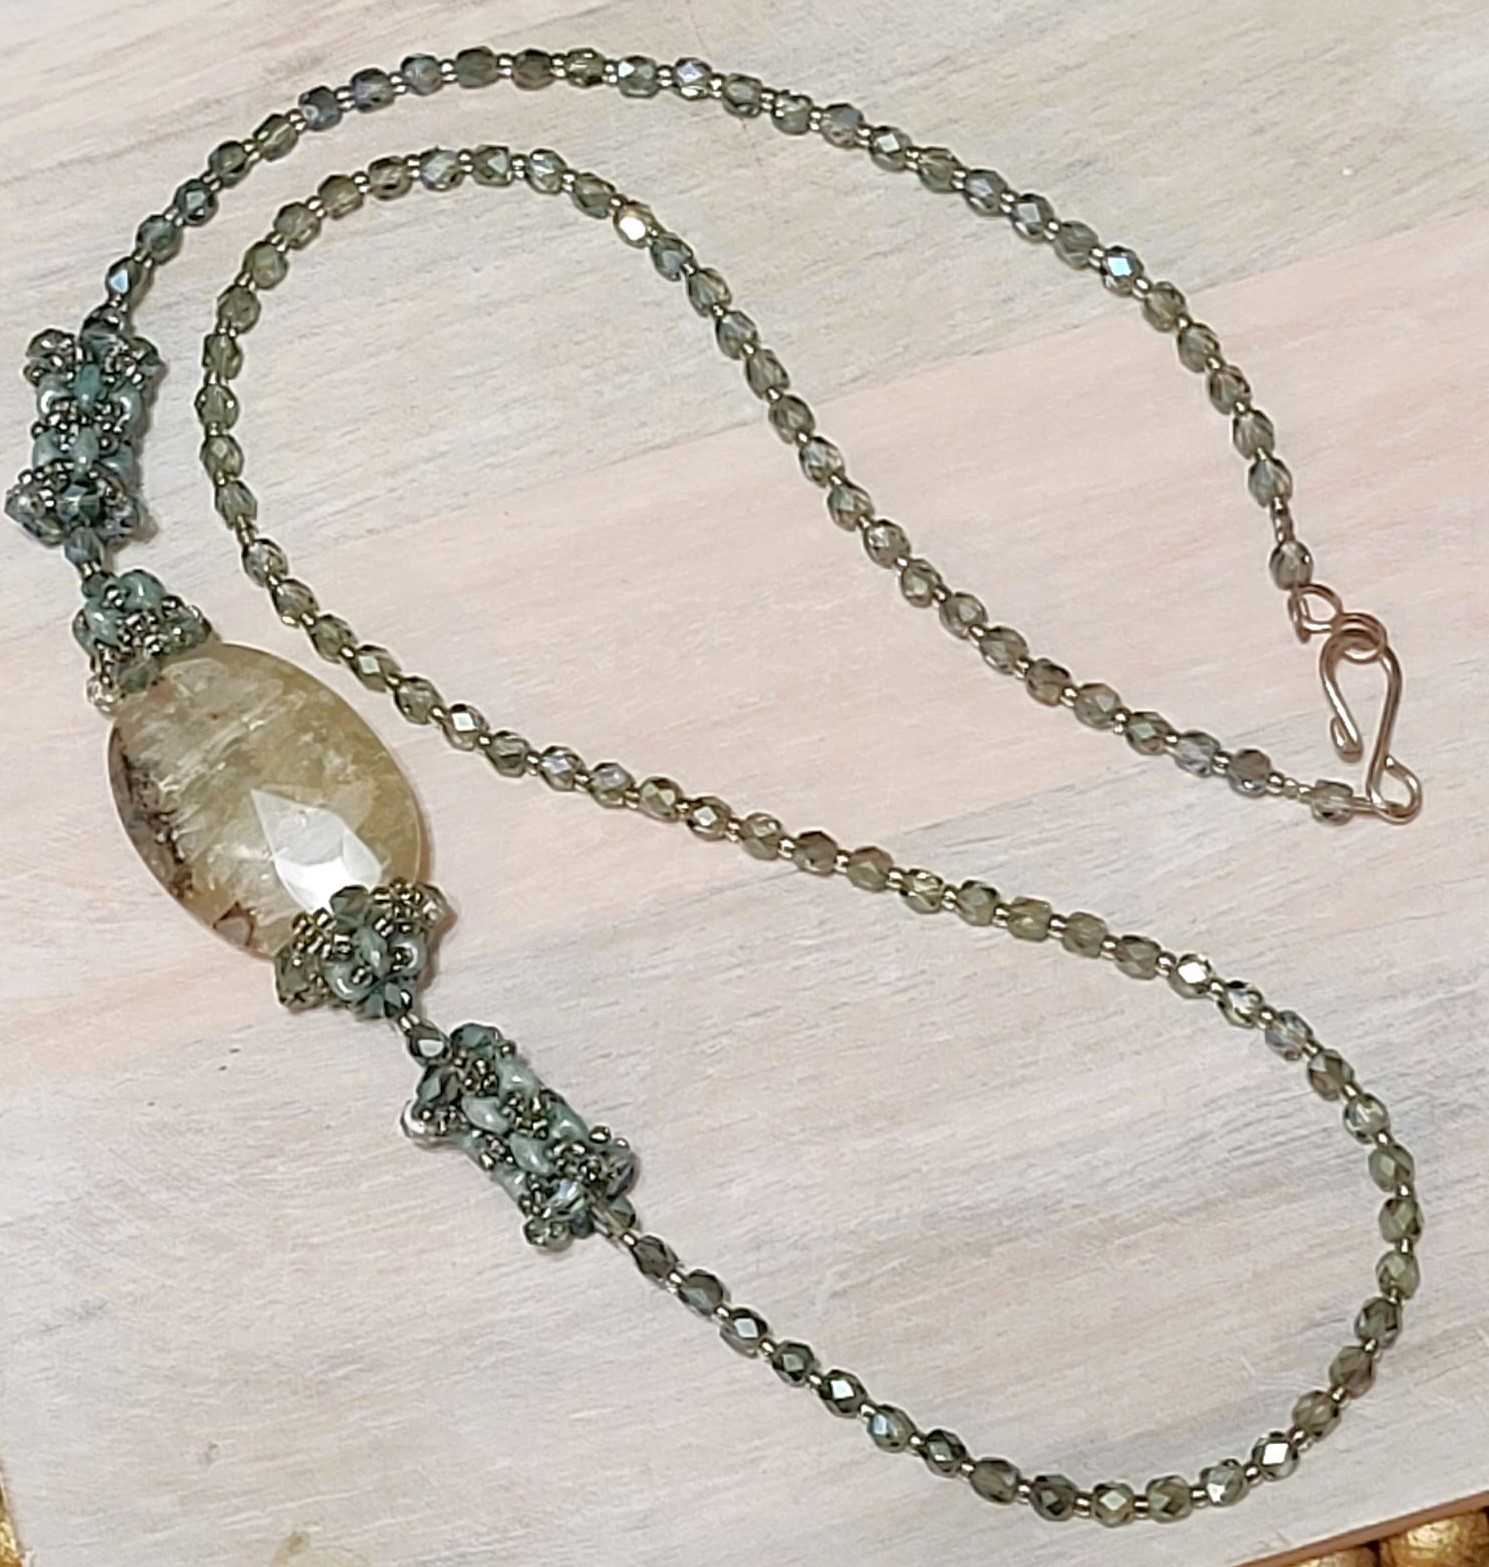 Gemstone and crystal necklace, green agate, green aurora crystal